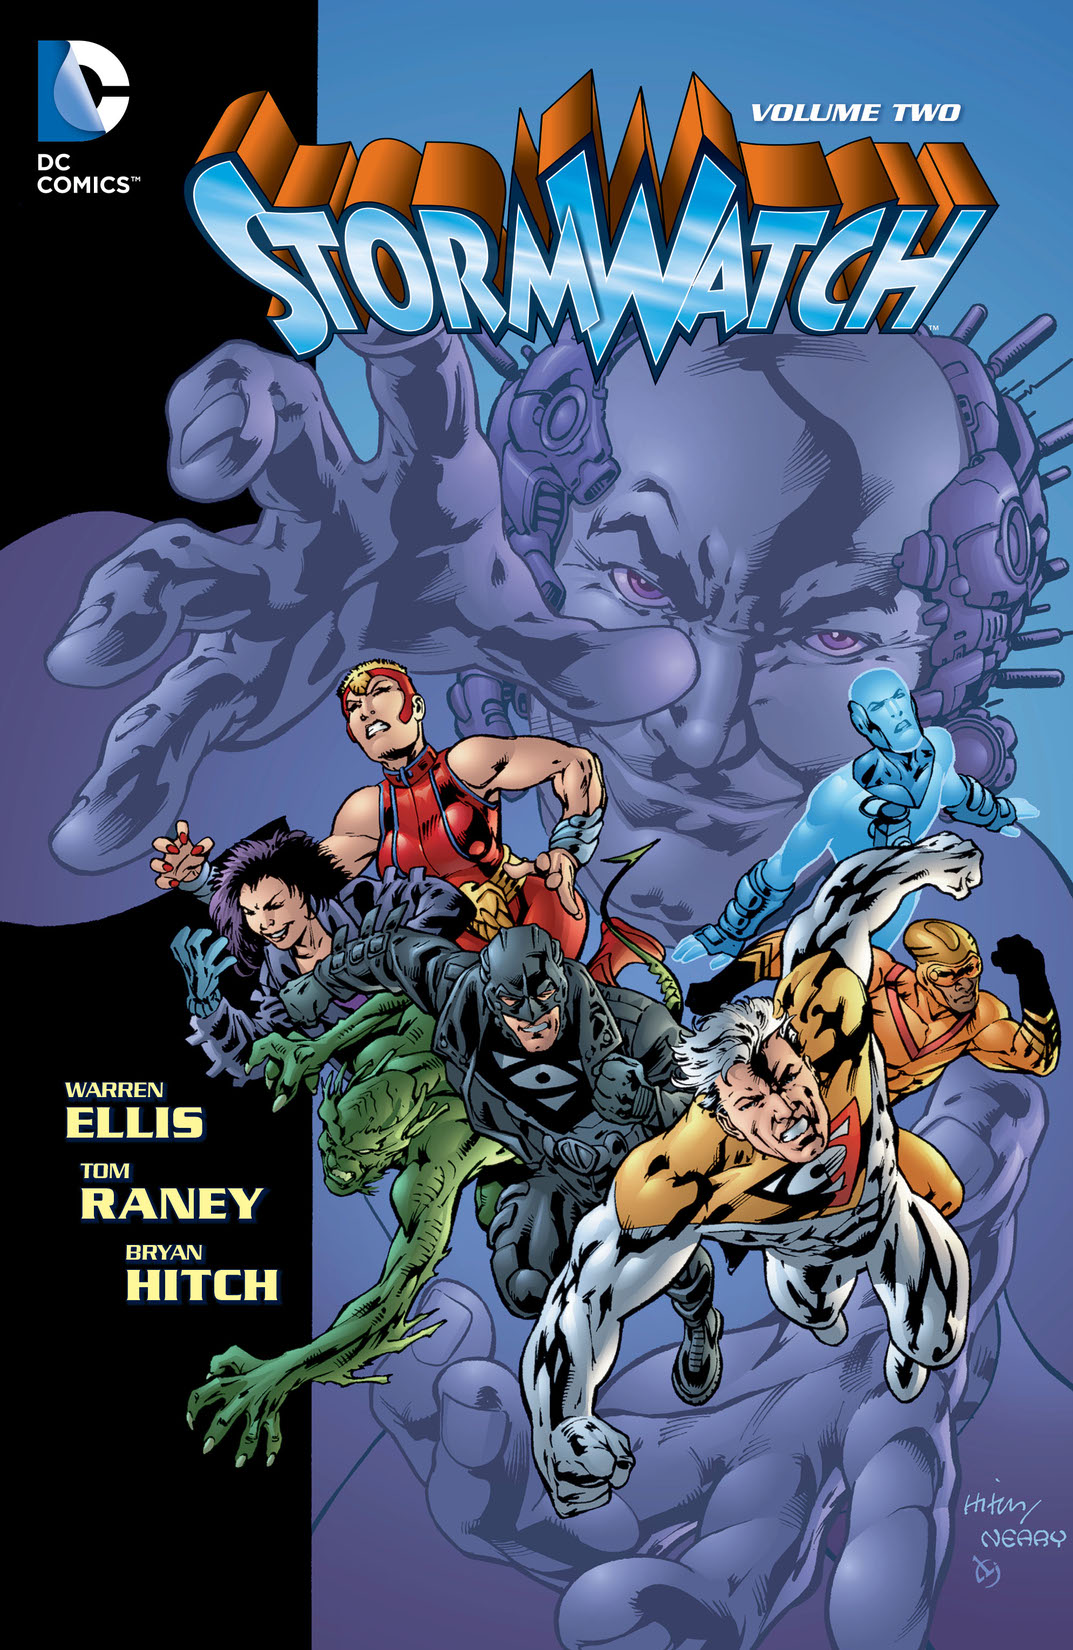 Stormwatch Vol. 2 preview images